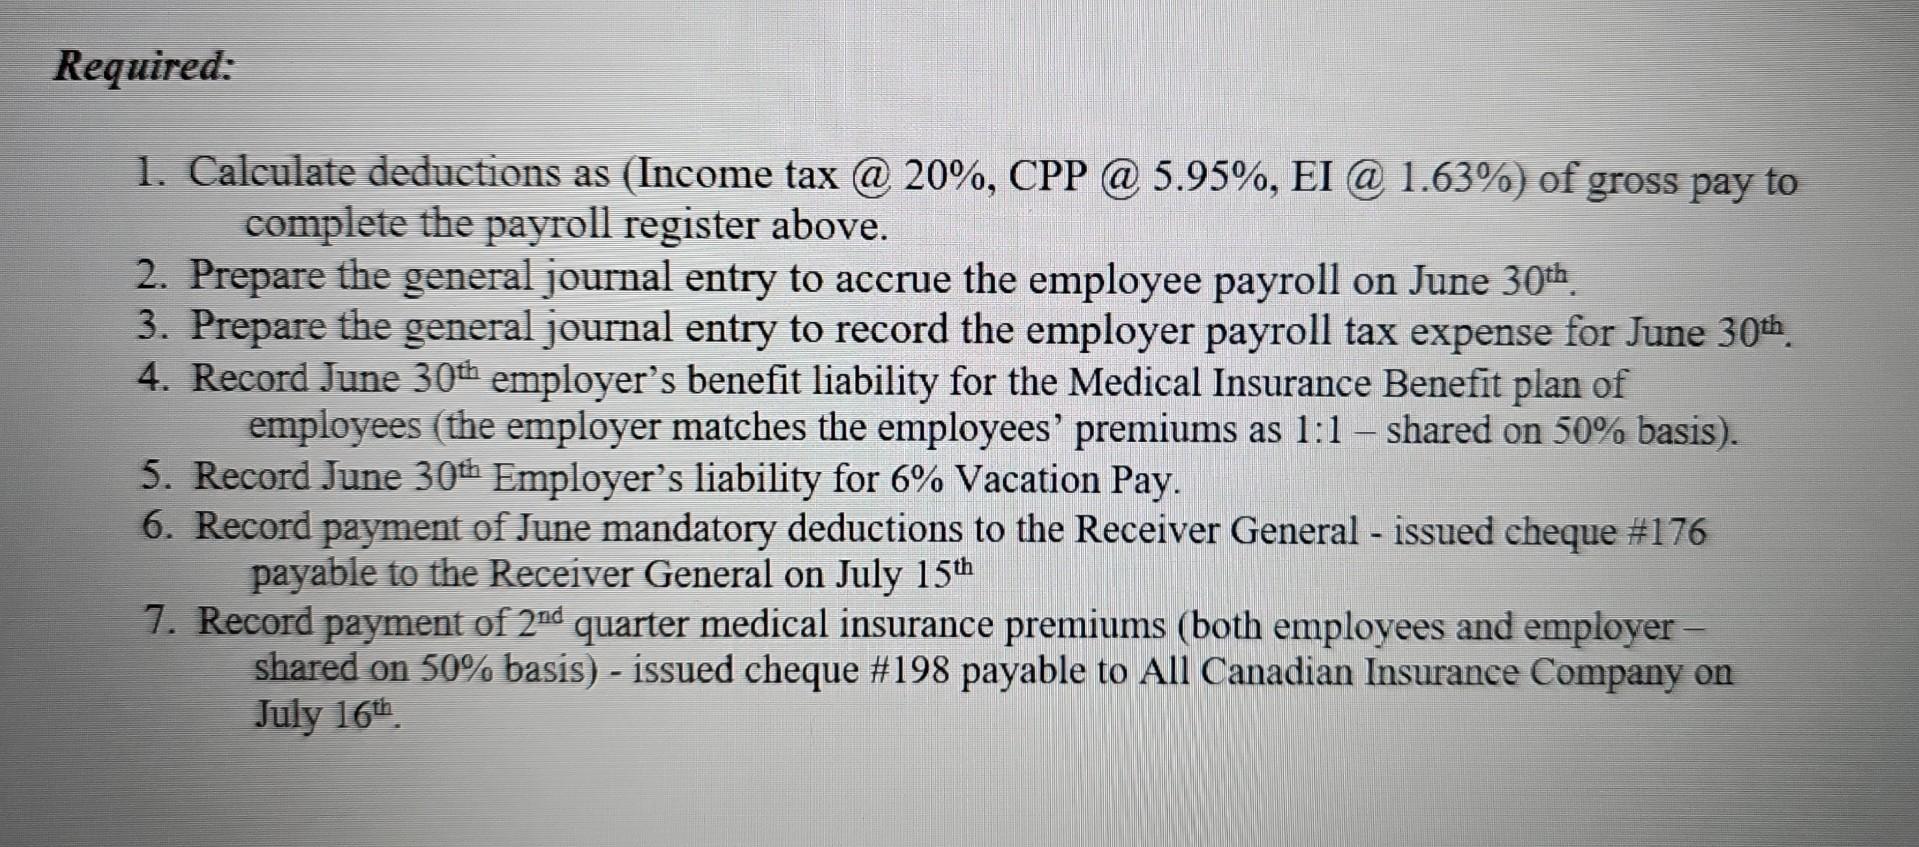 Required: 1. Calculate deductions as (Income tax @ 20%, CPP @ 5.95%, EI @ 1.63%) of gross pay to complete the